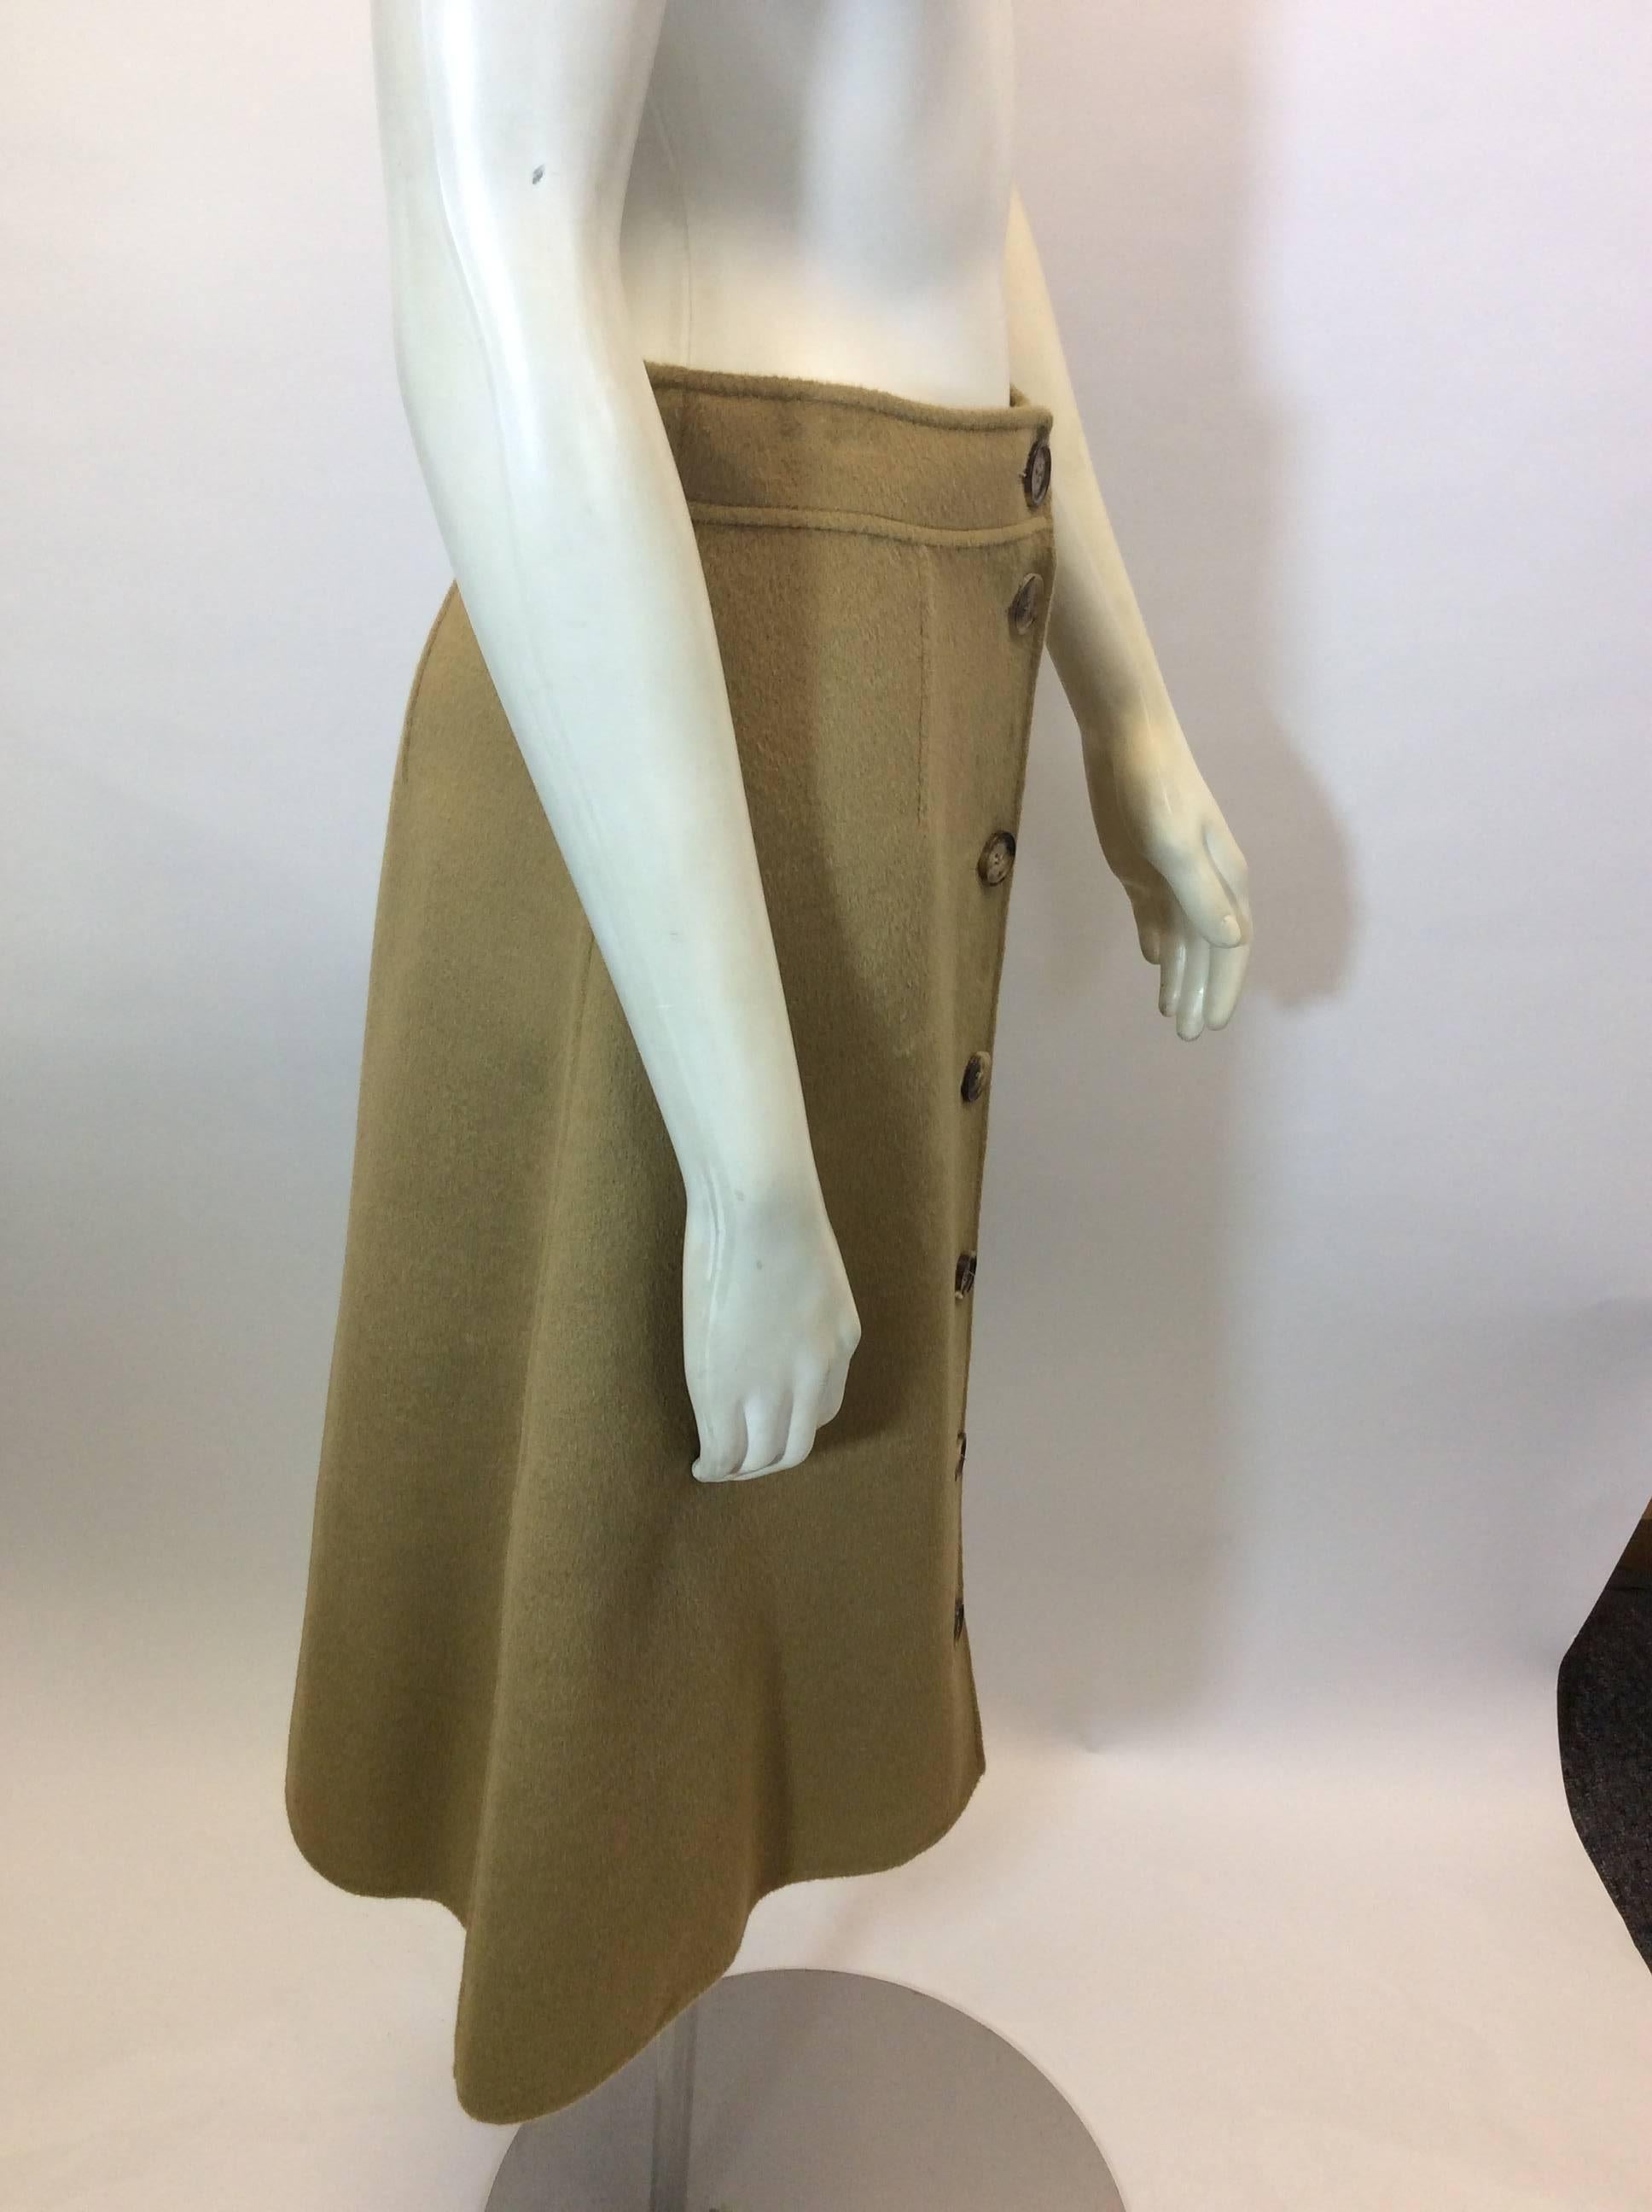 Button Down A-Line Skirt
Center front button and snap closure
Size 4
50% Wool, 48% Angora, 2% Spandex